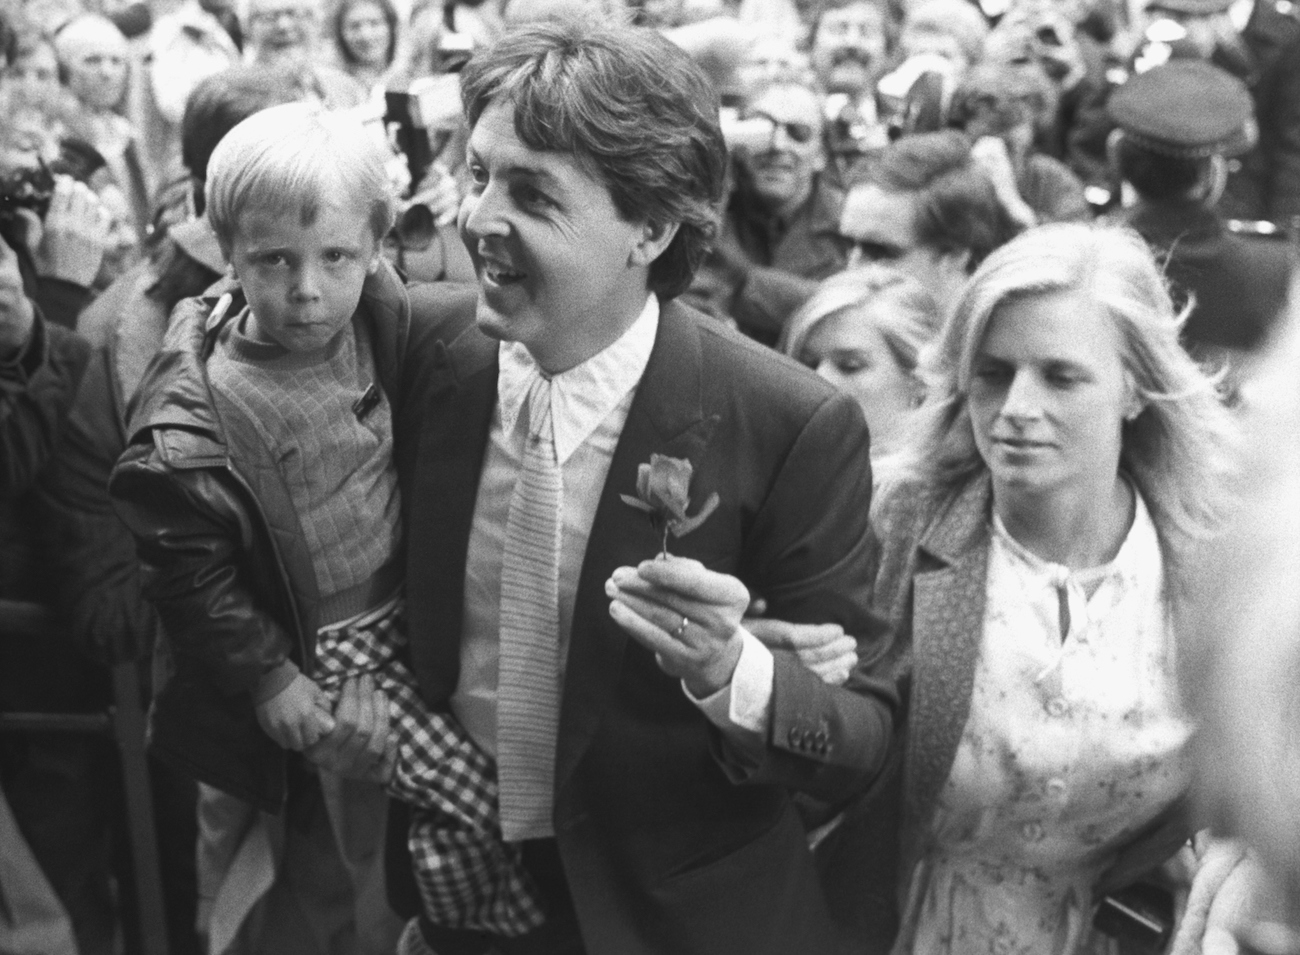 Paul McCartney with his son James and wife Linda at the wedding of Ringo Starr and Barbara Bach.